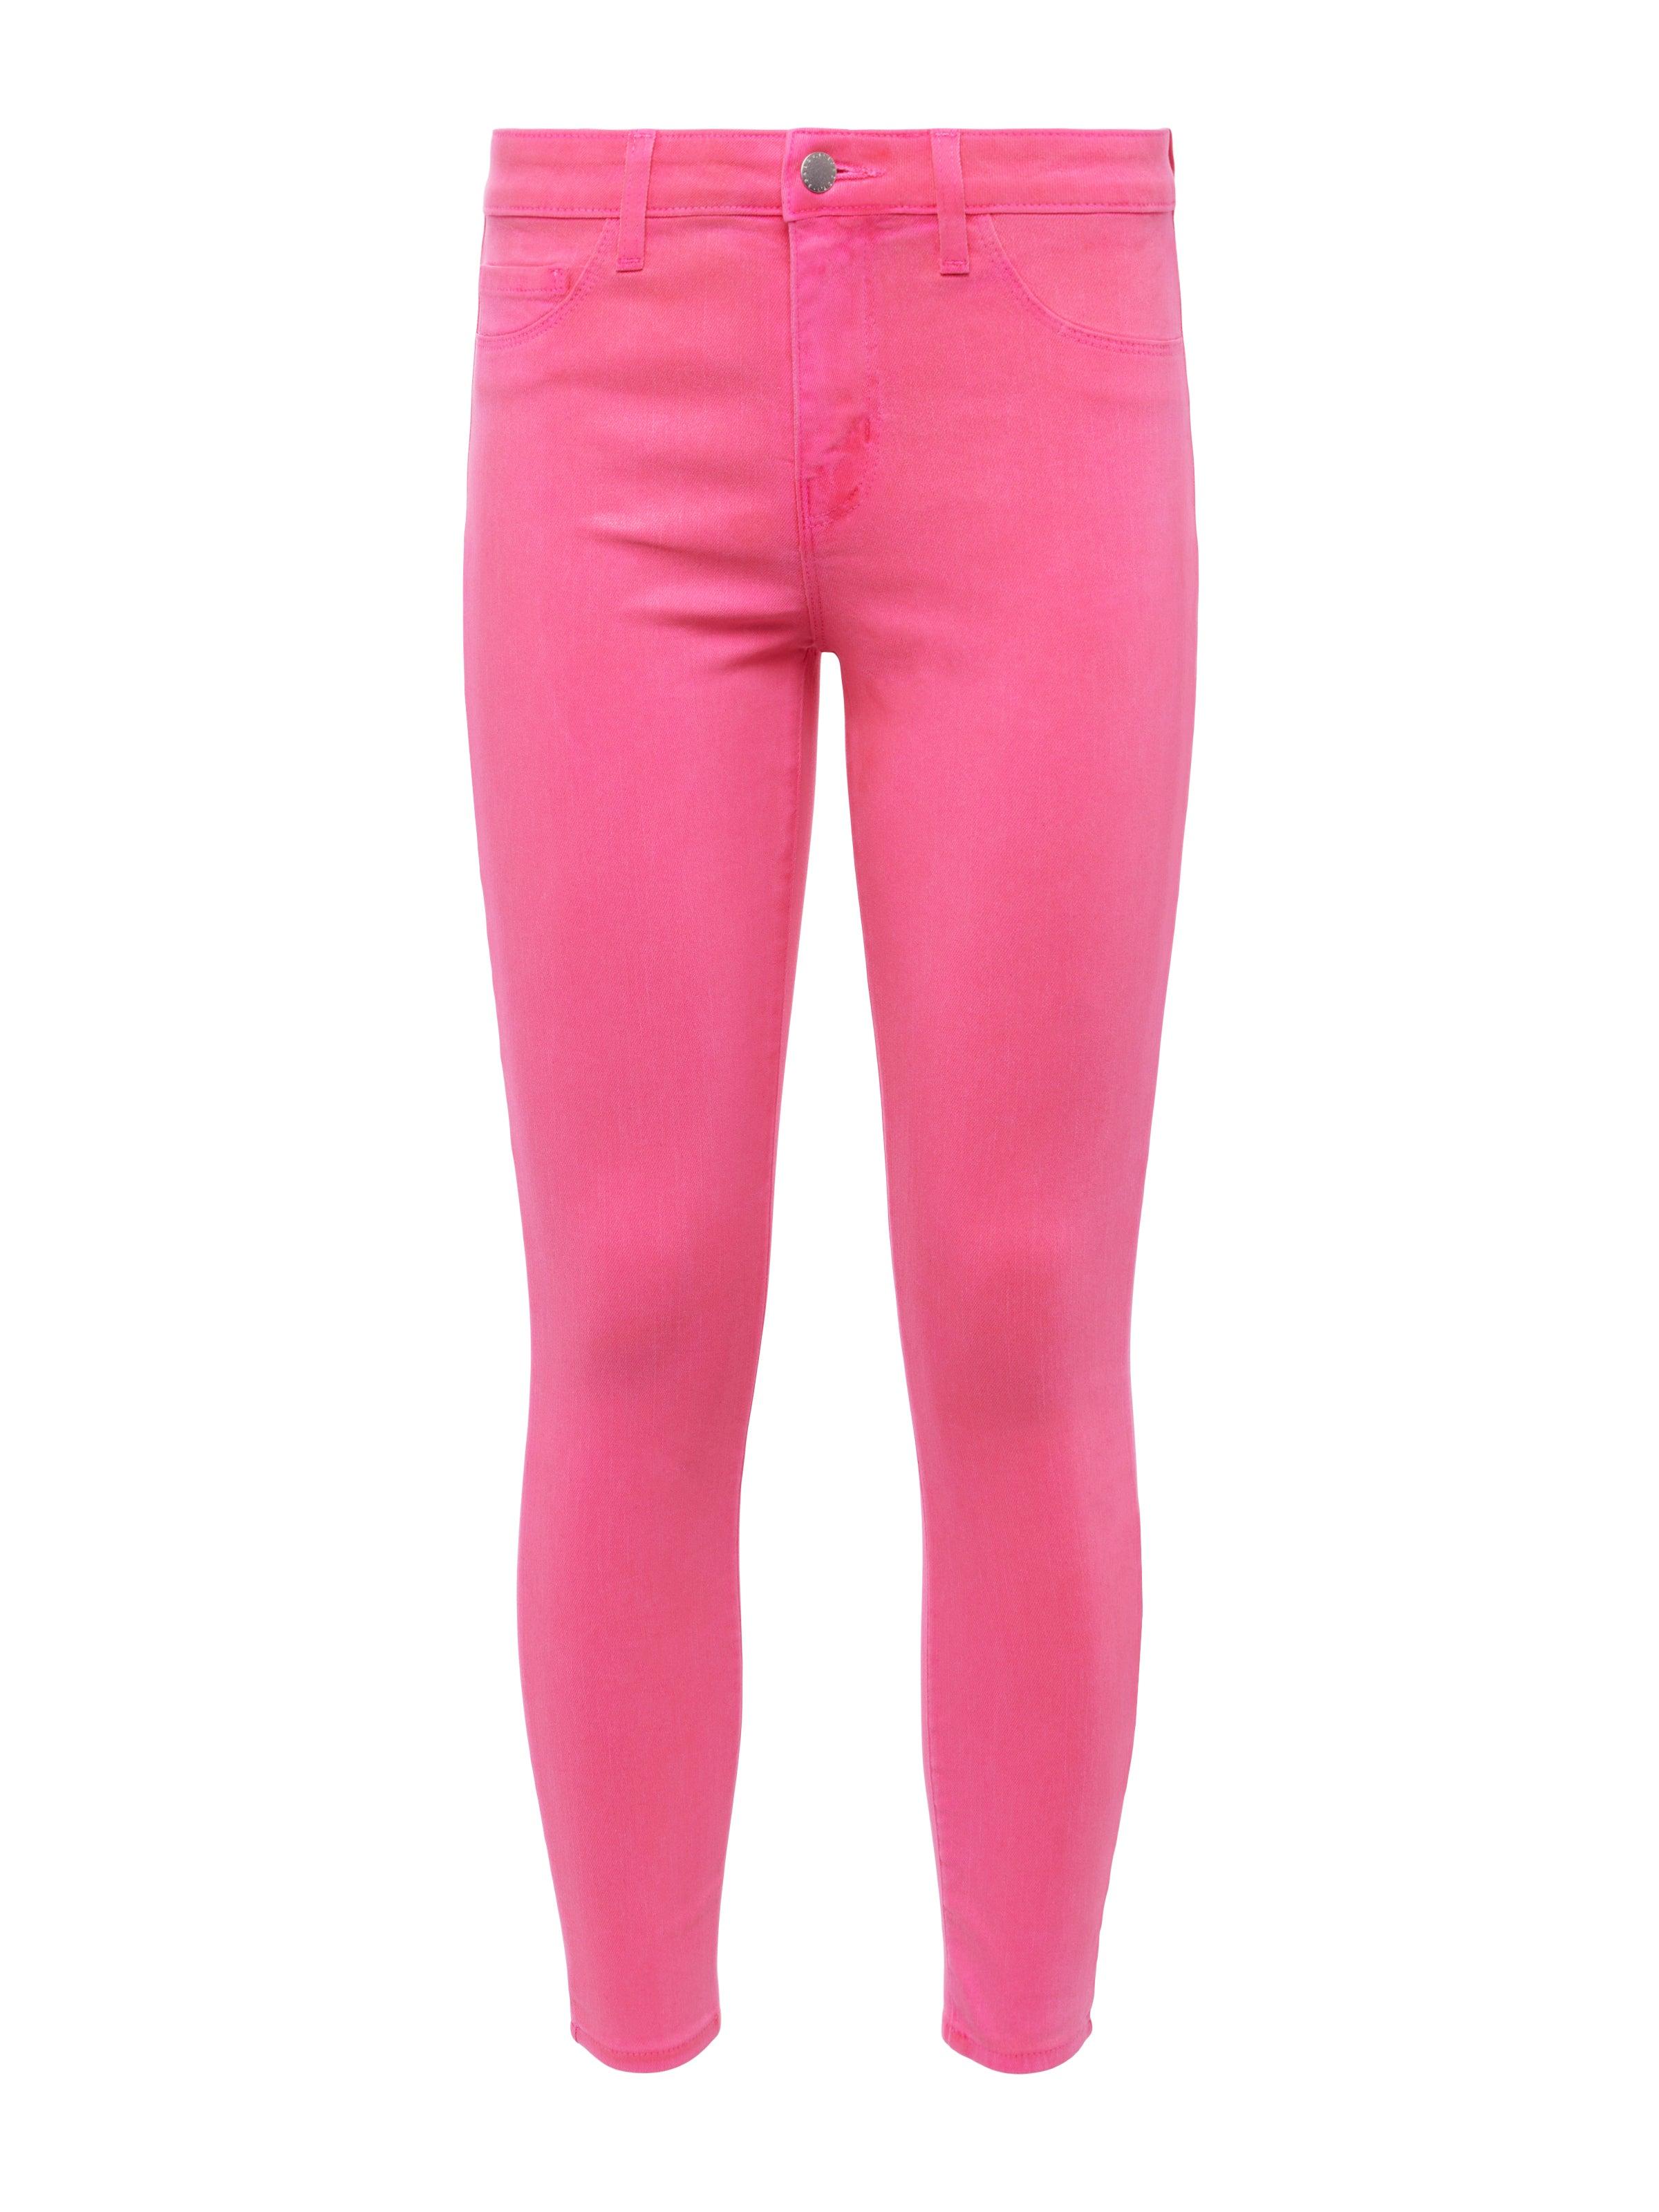 L'Agence Margot Coated Jean in Pink | Lyst